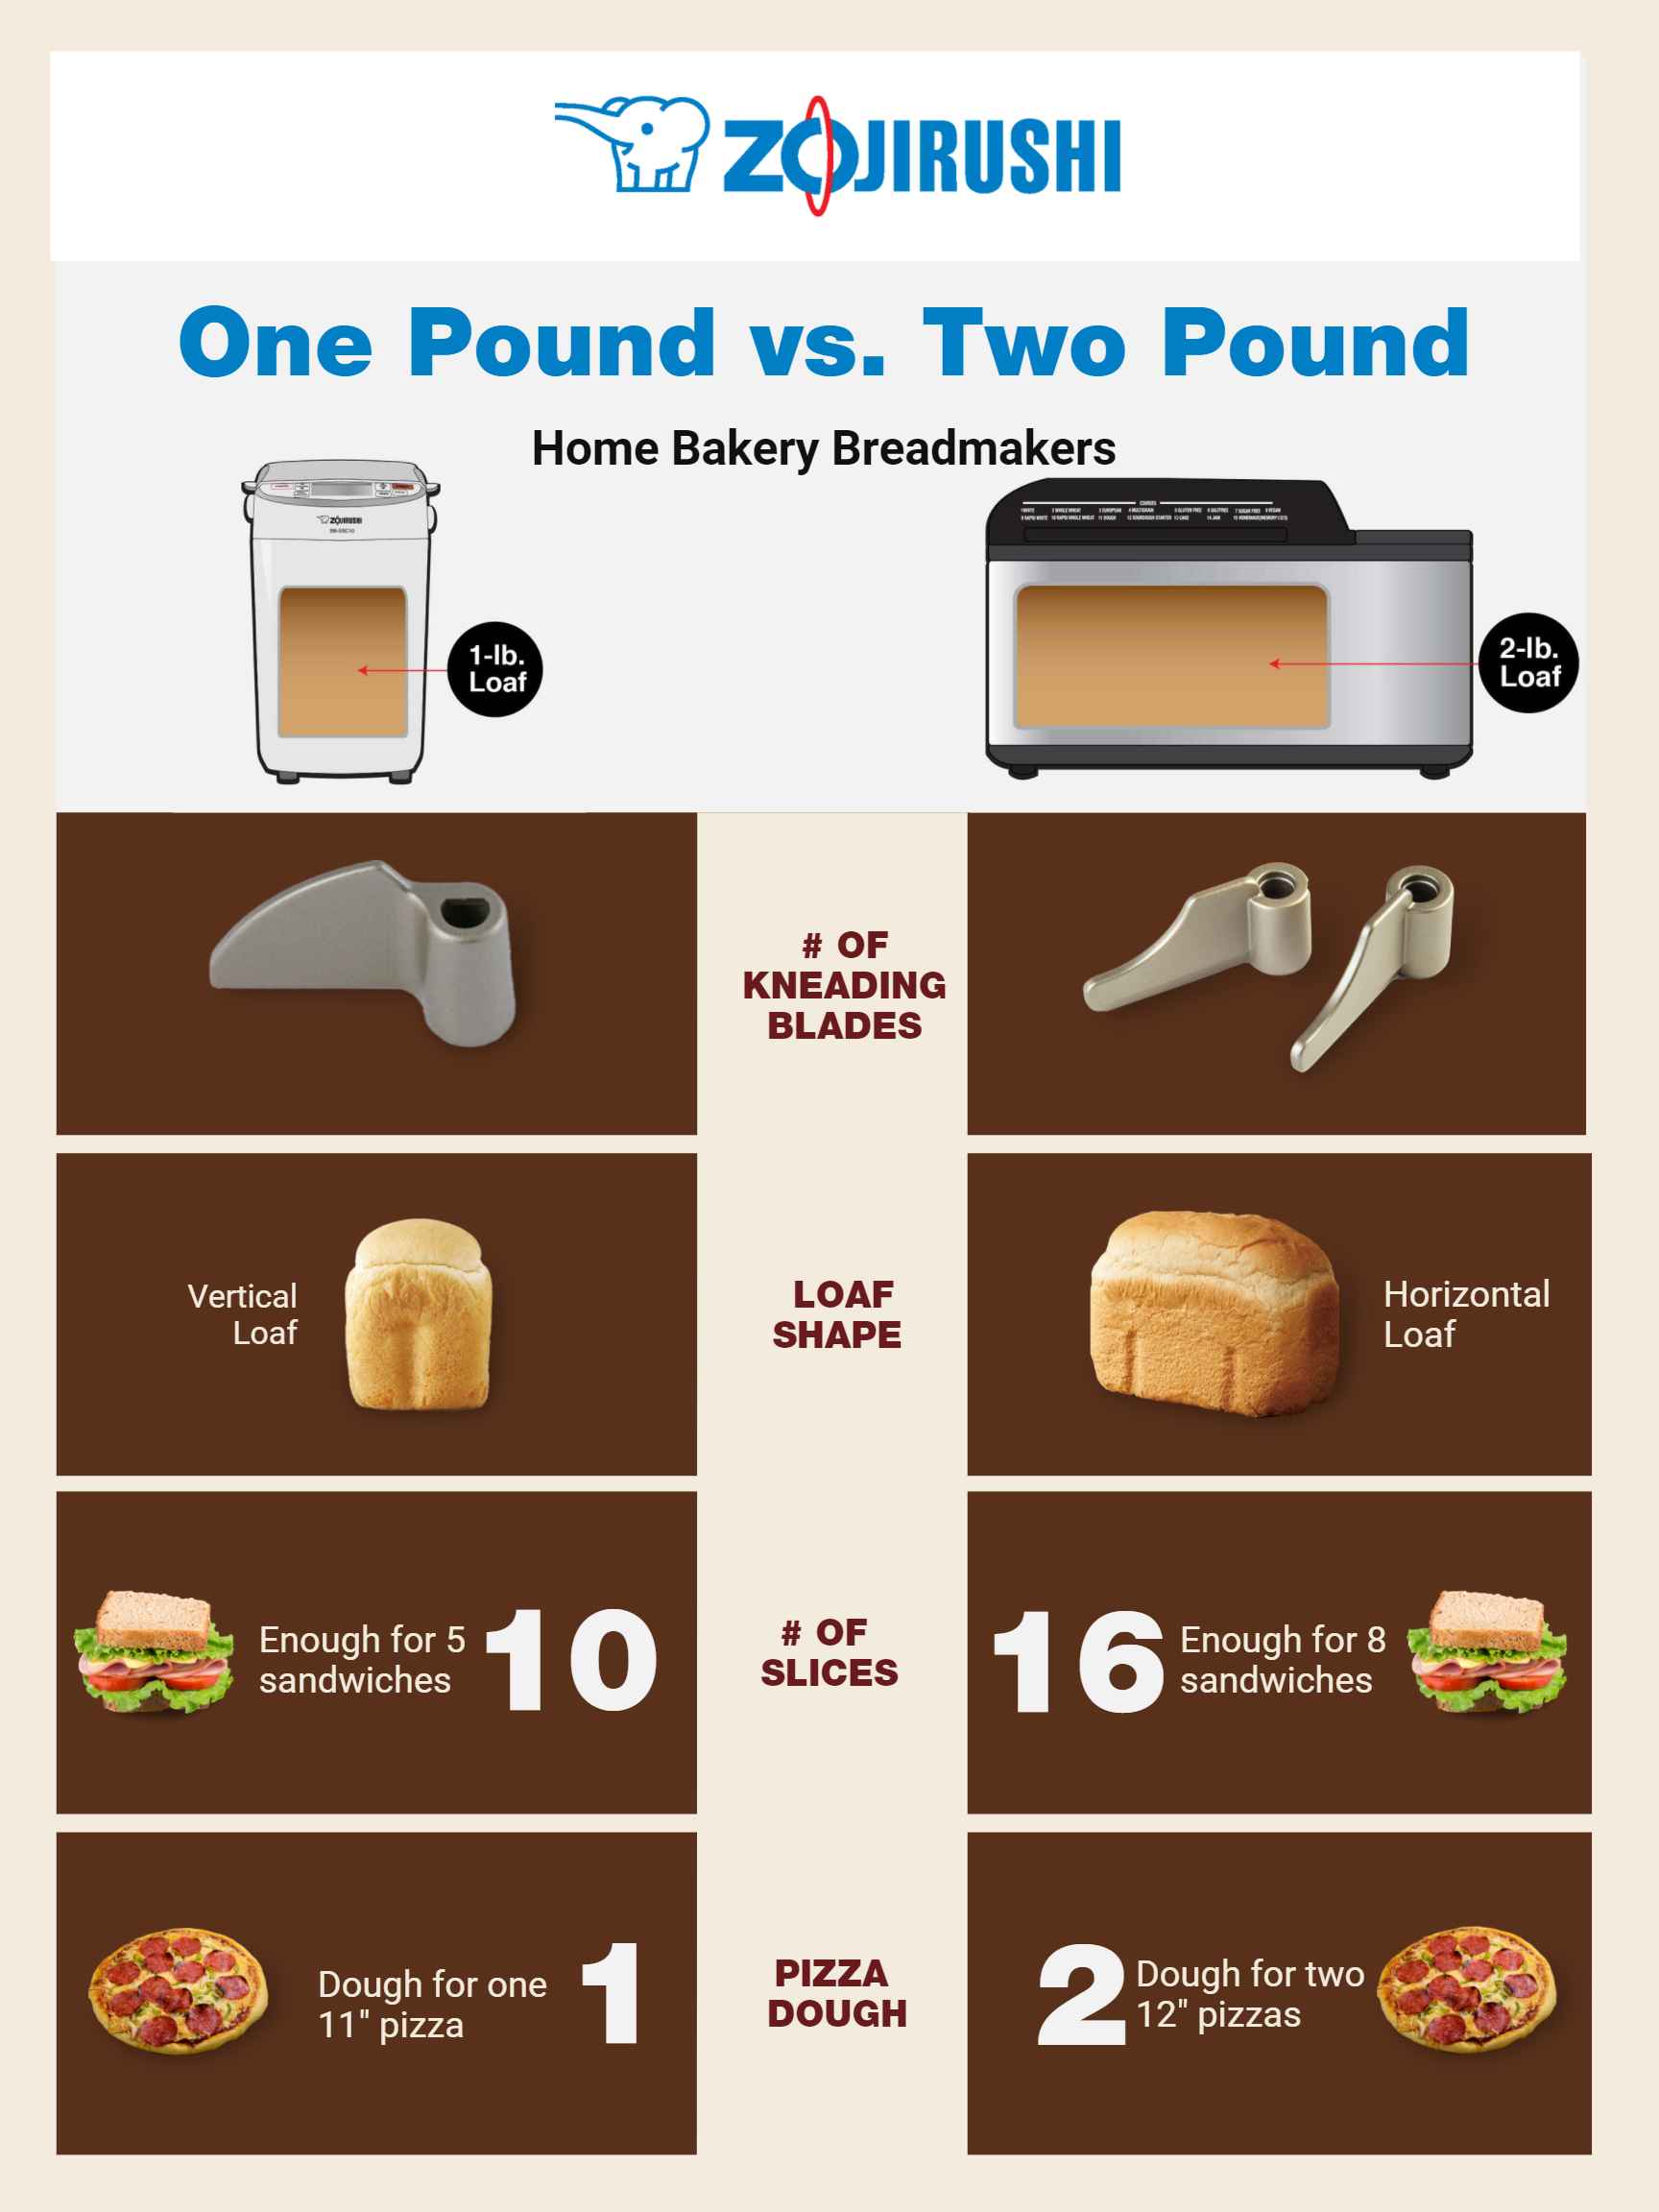 Bread makers 101: The basic guide for using a bread machine